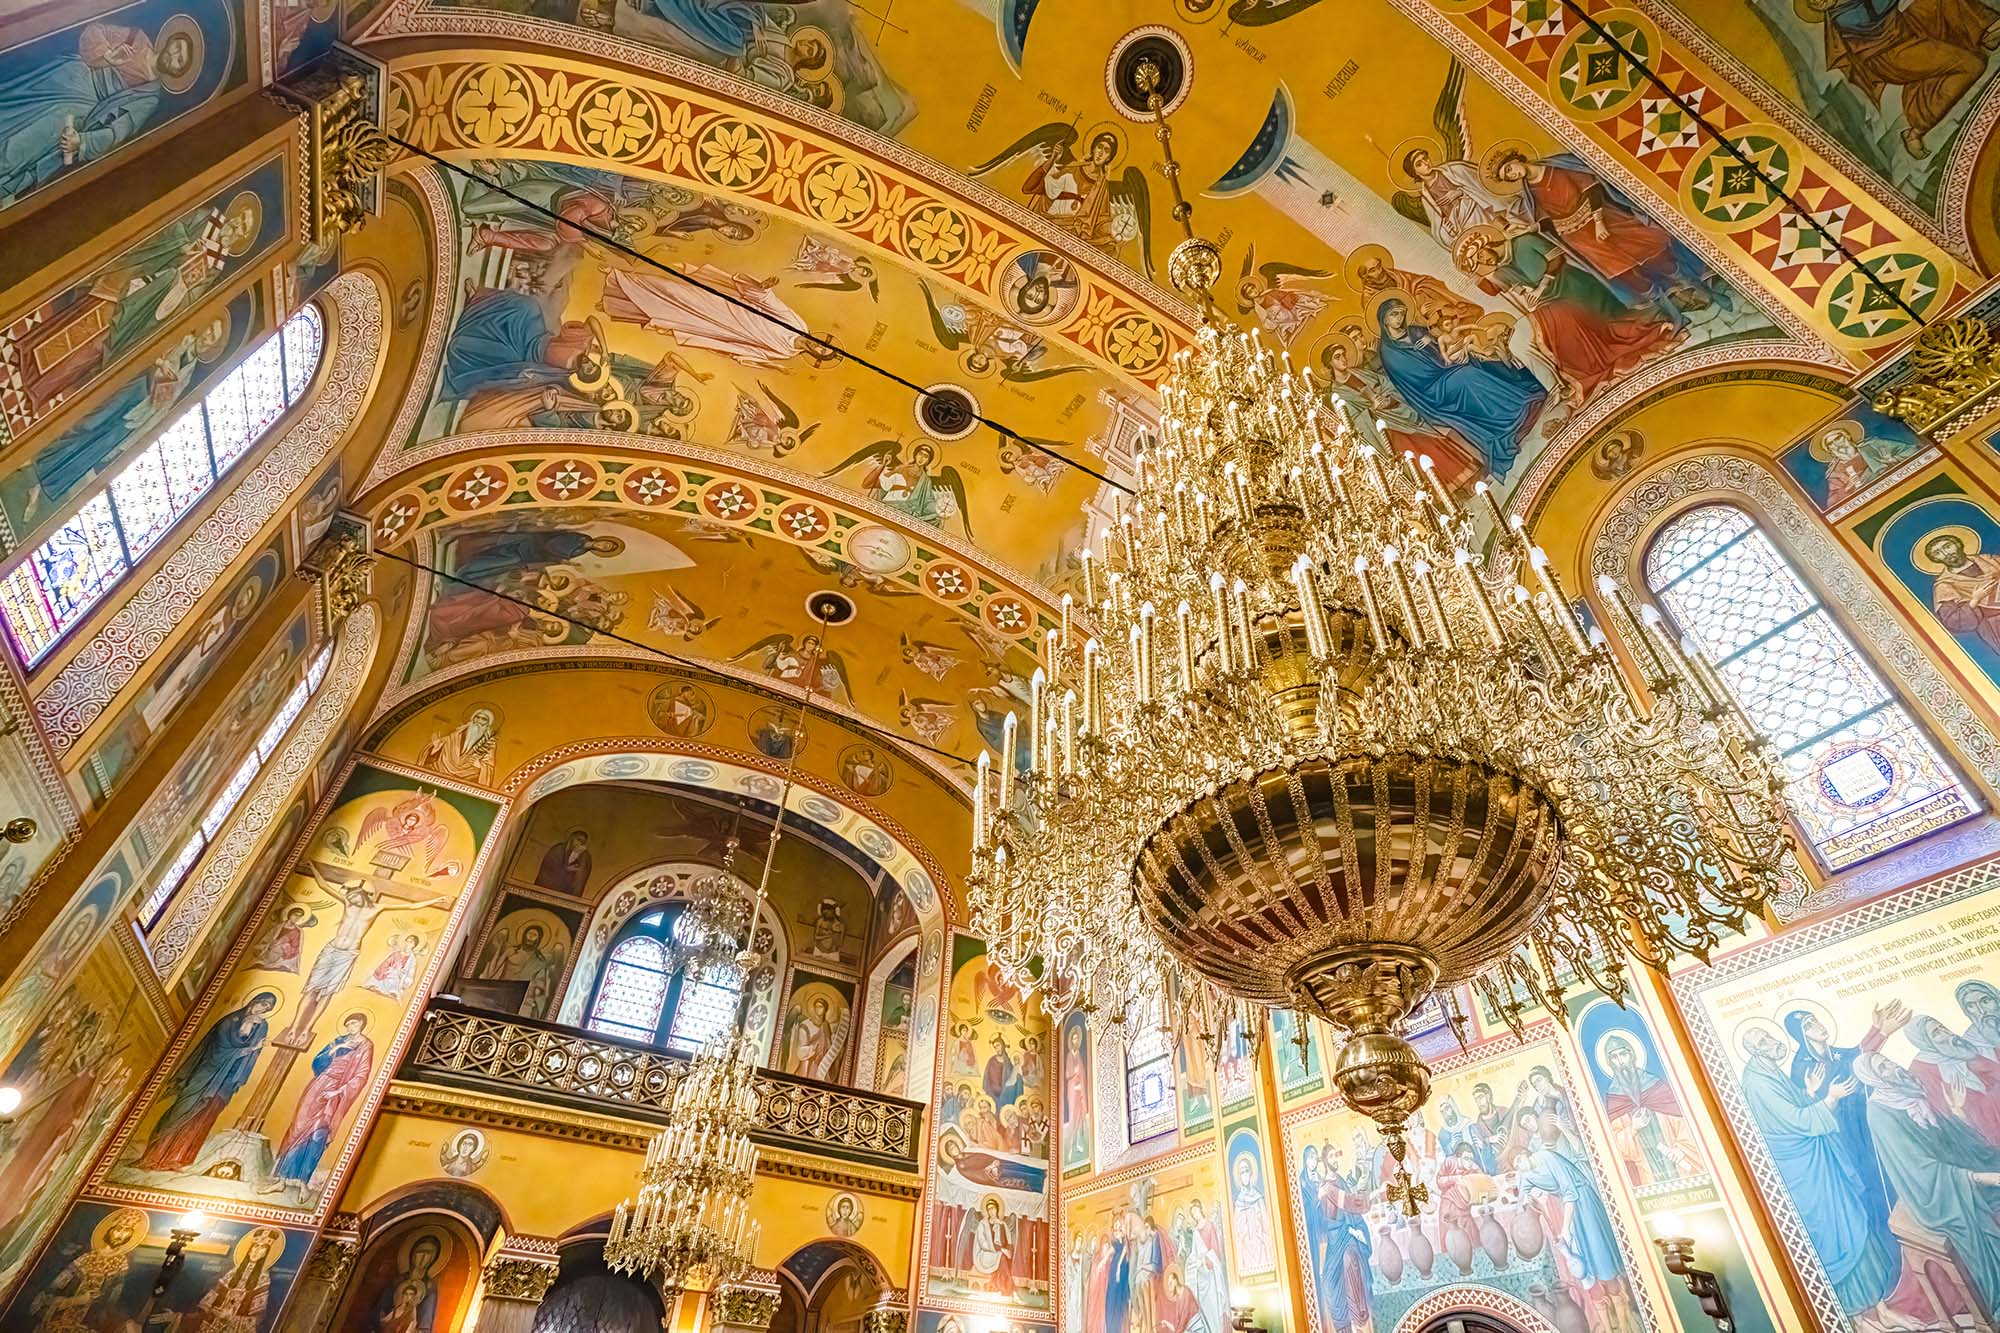 "Russian Orthodox Radiance" captures a mesmerizing view from within the Russian Orthodox Church in Zagreb, Croatia "Church of...